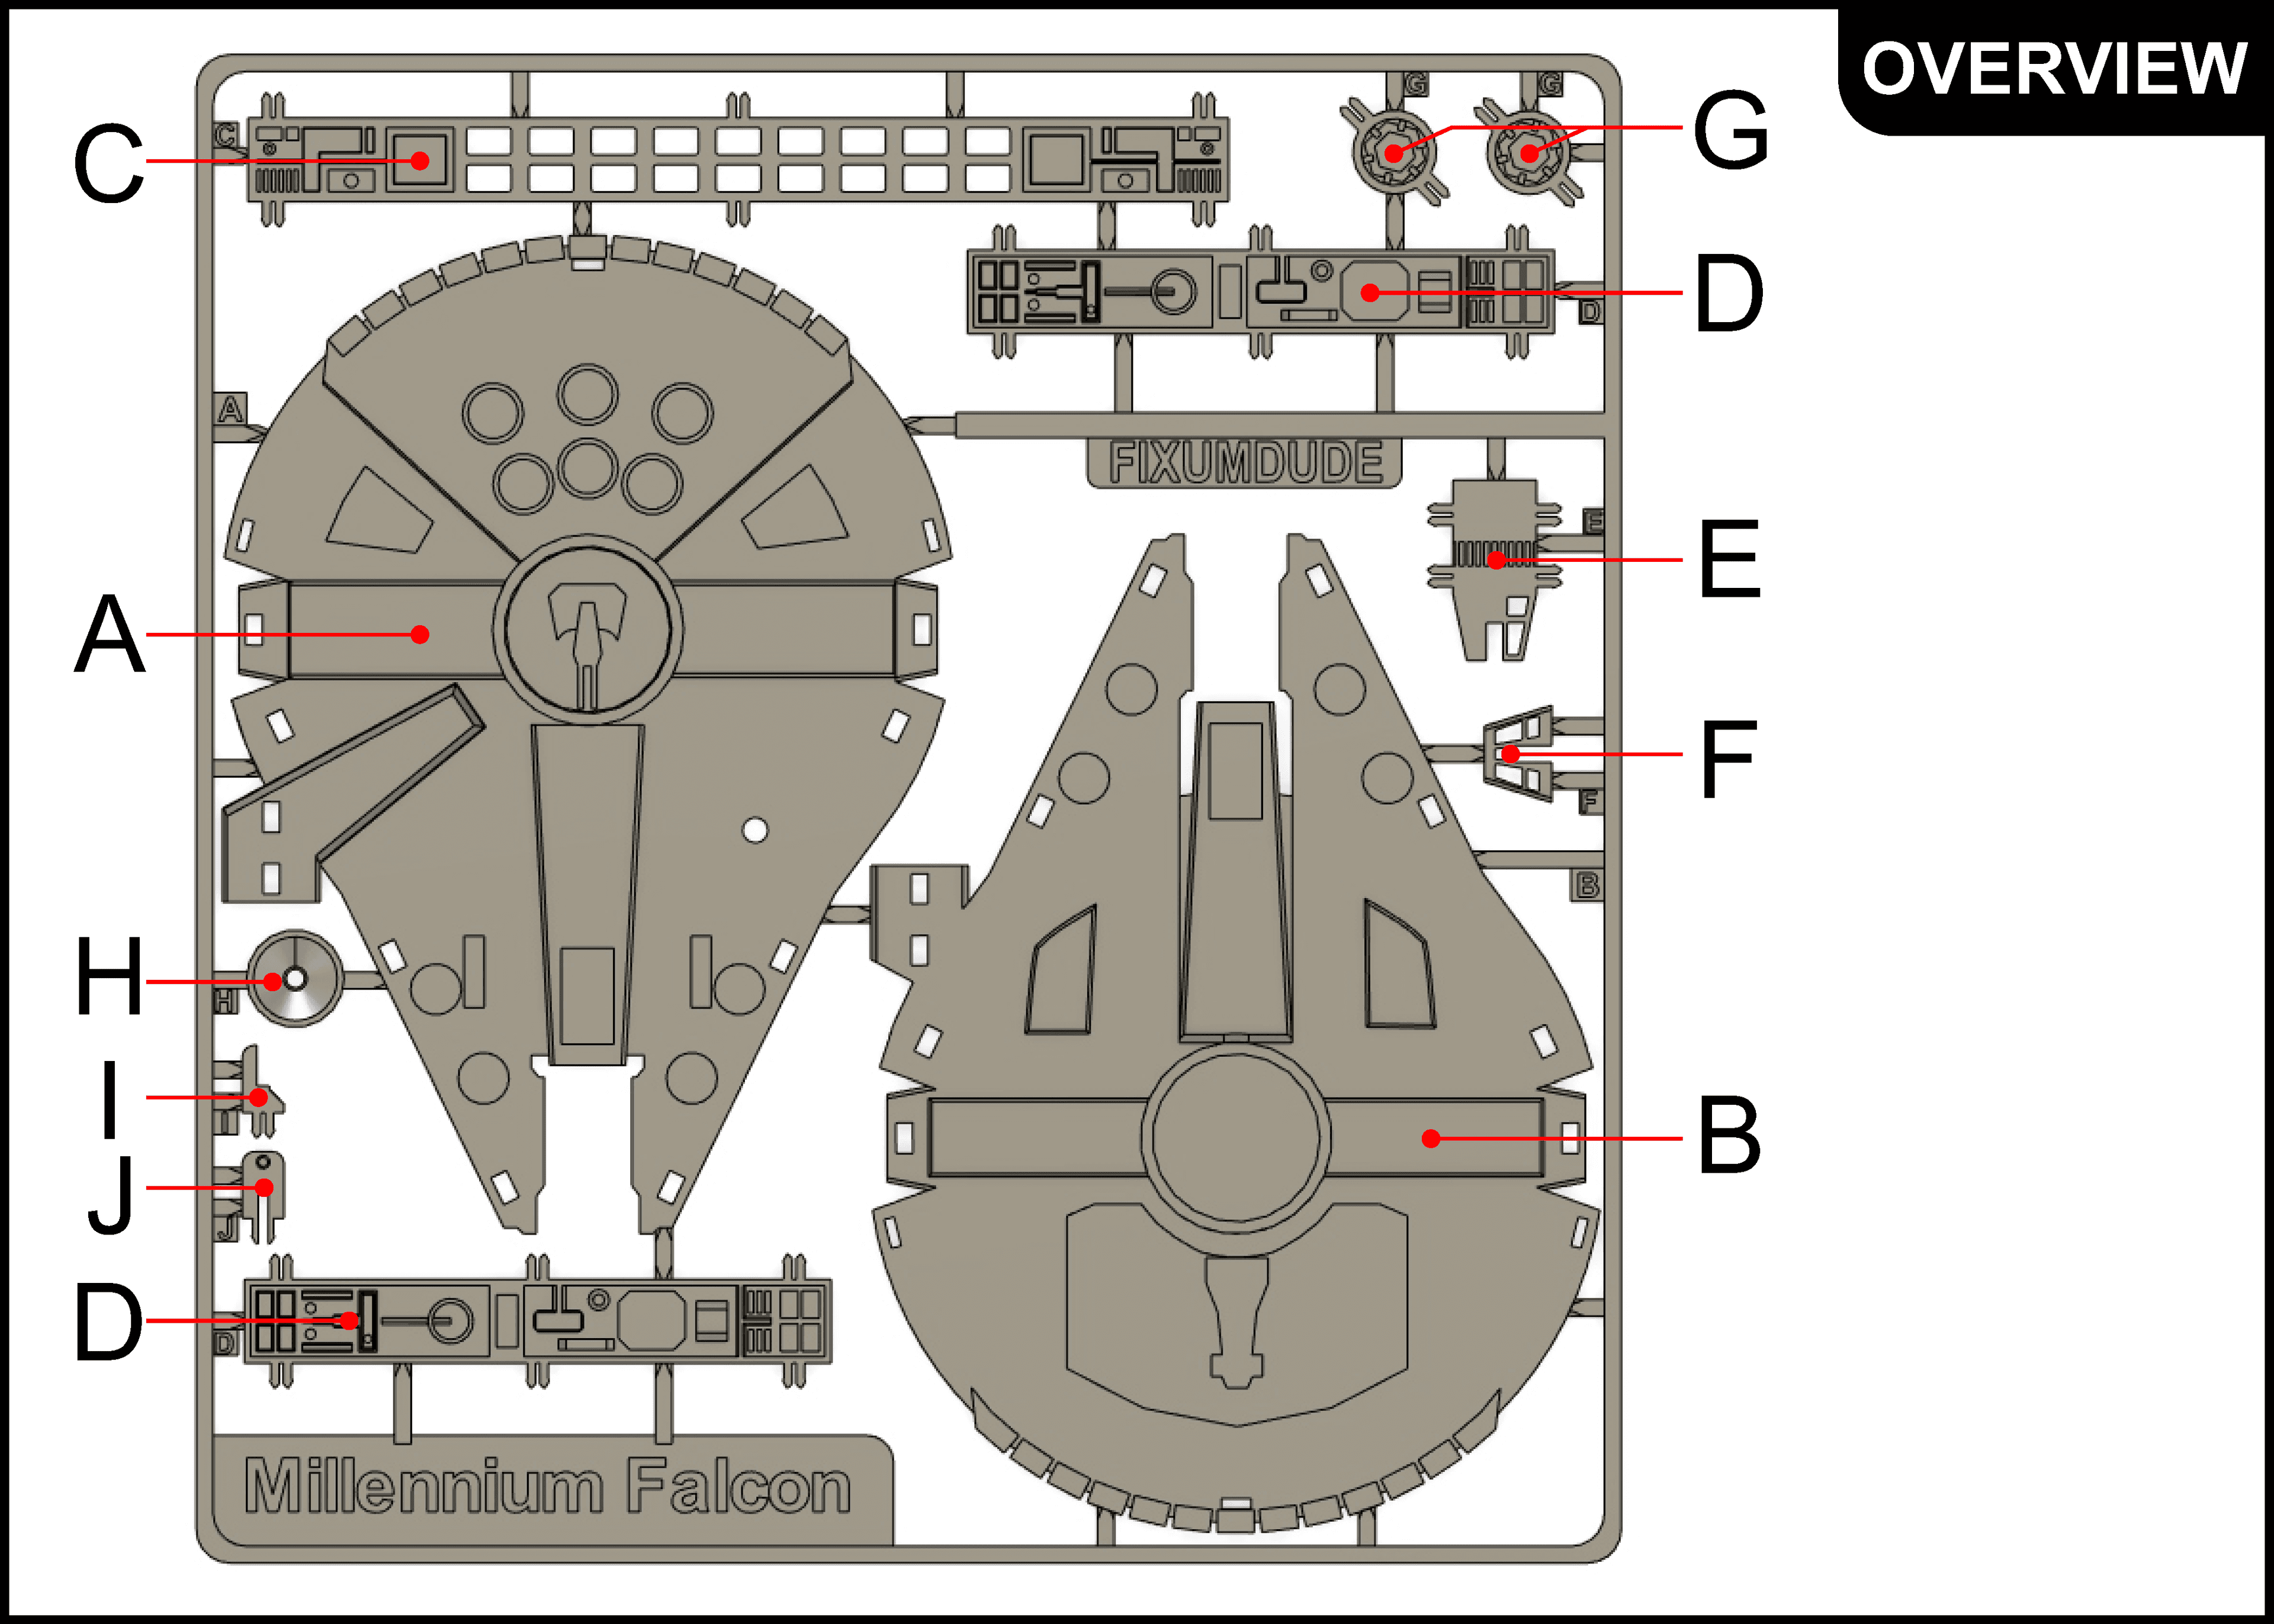 Millennium Falcon Kit Card by Fixumdude - Instructions 00 - 3d model